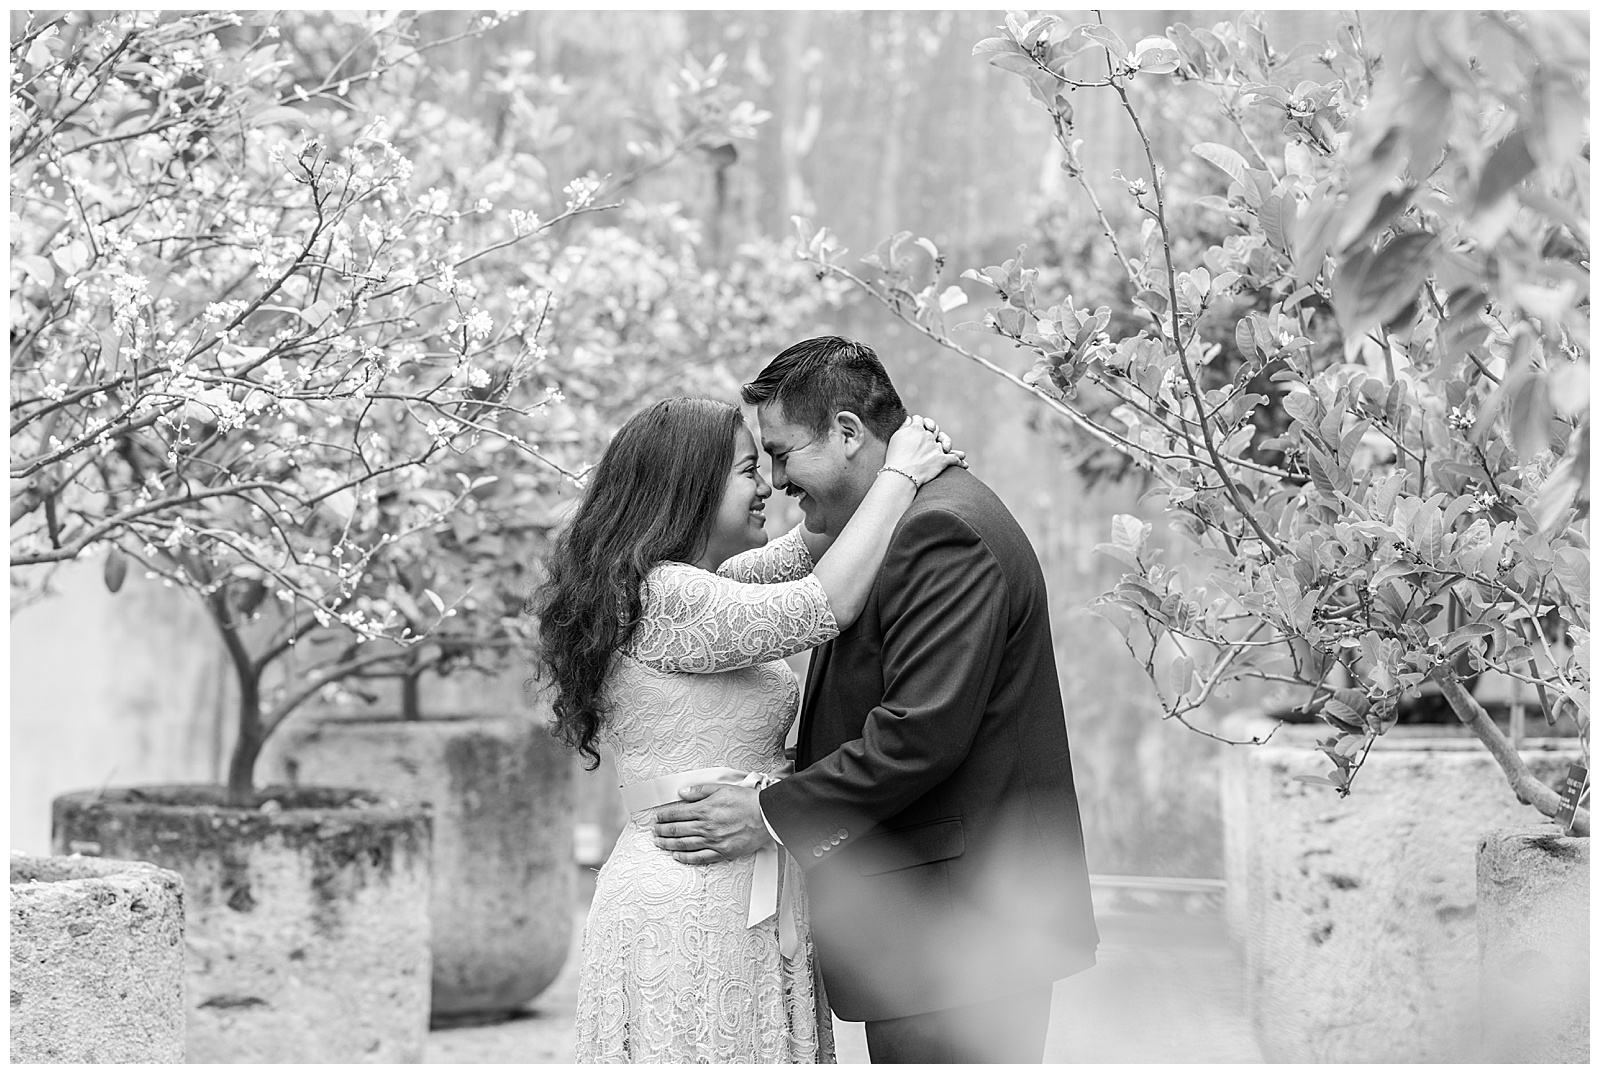 Engagement Session at the Botanical Gardens in San Antonio Texas